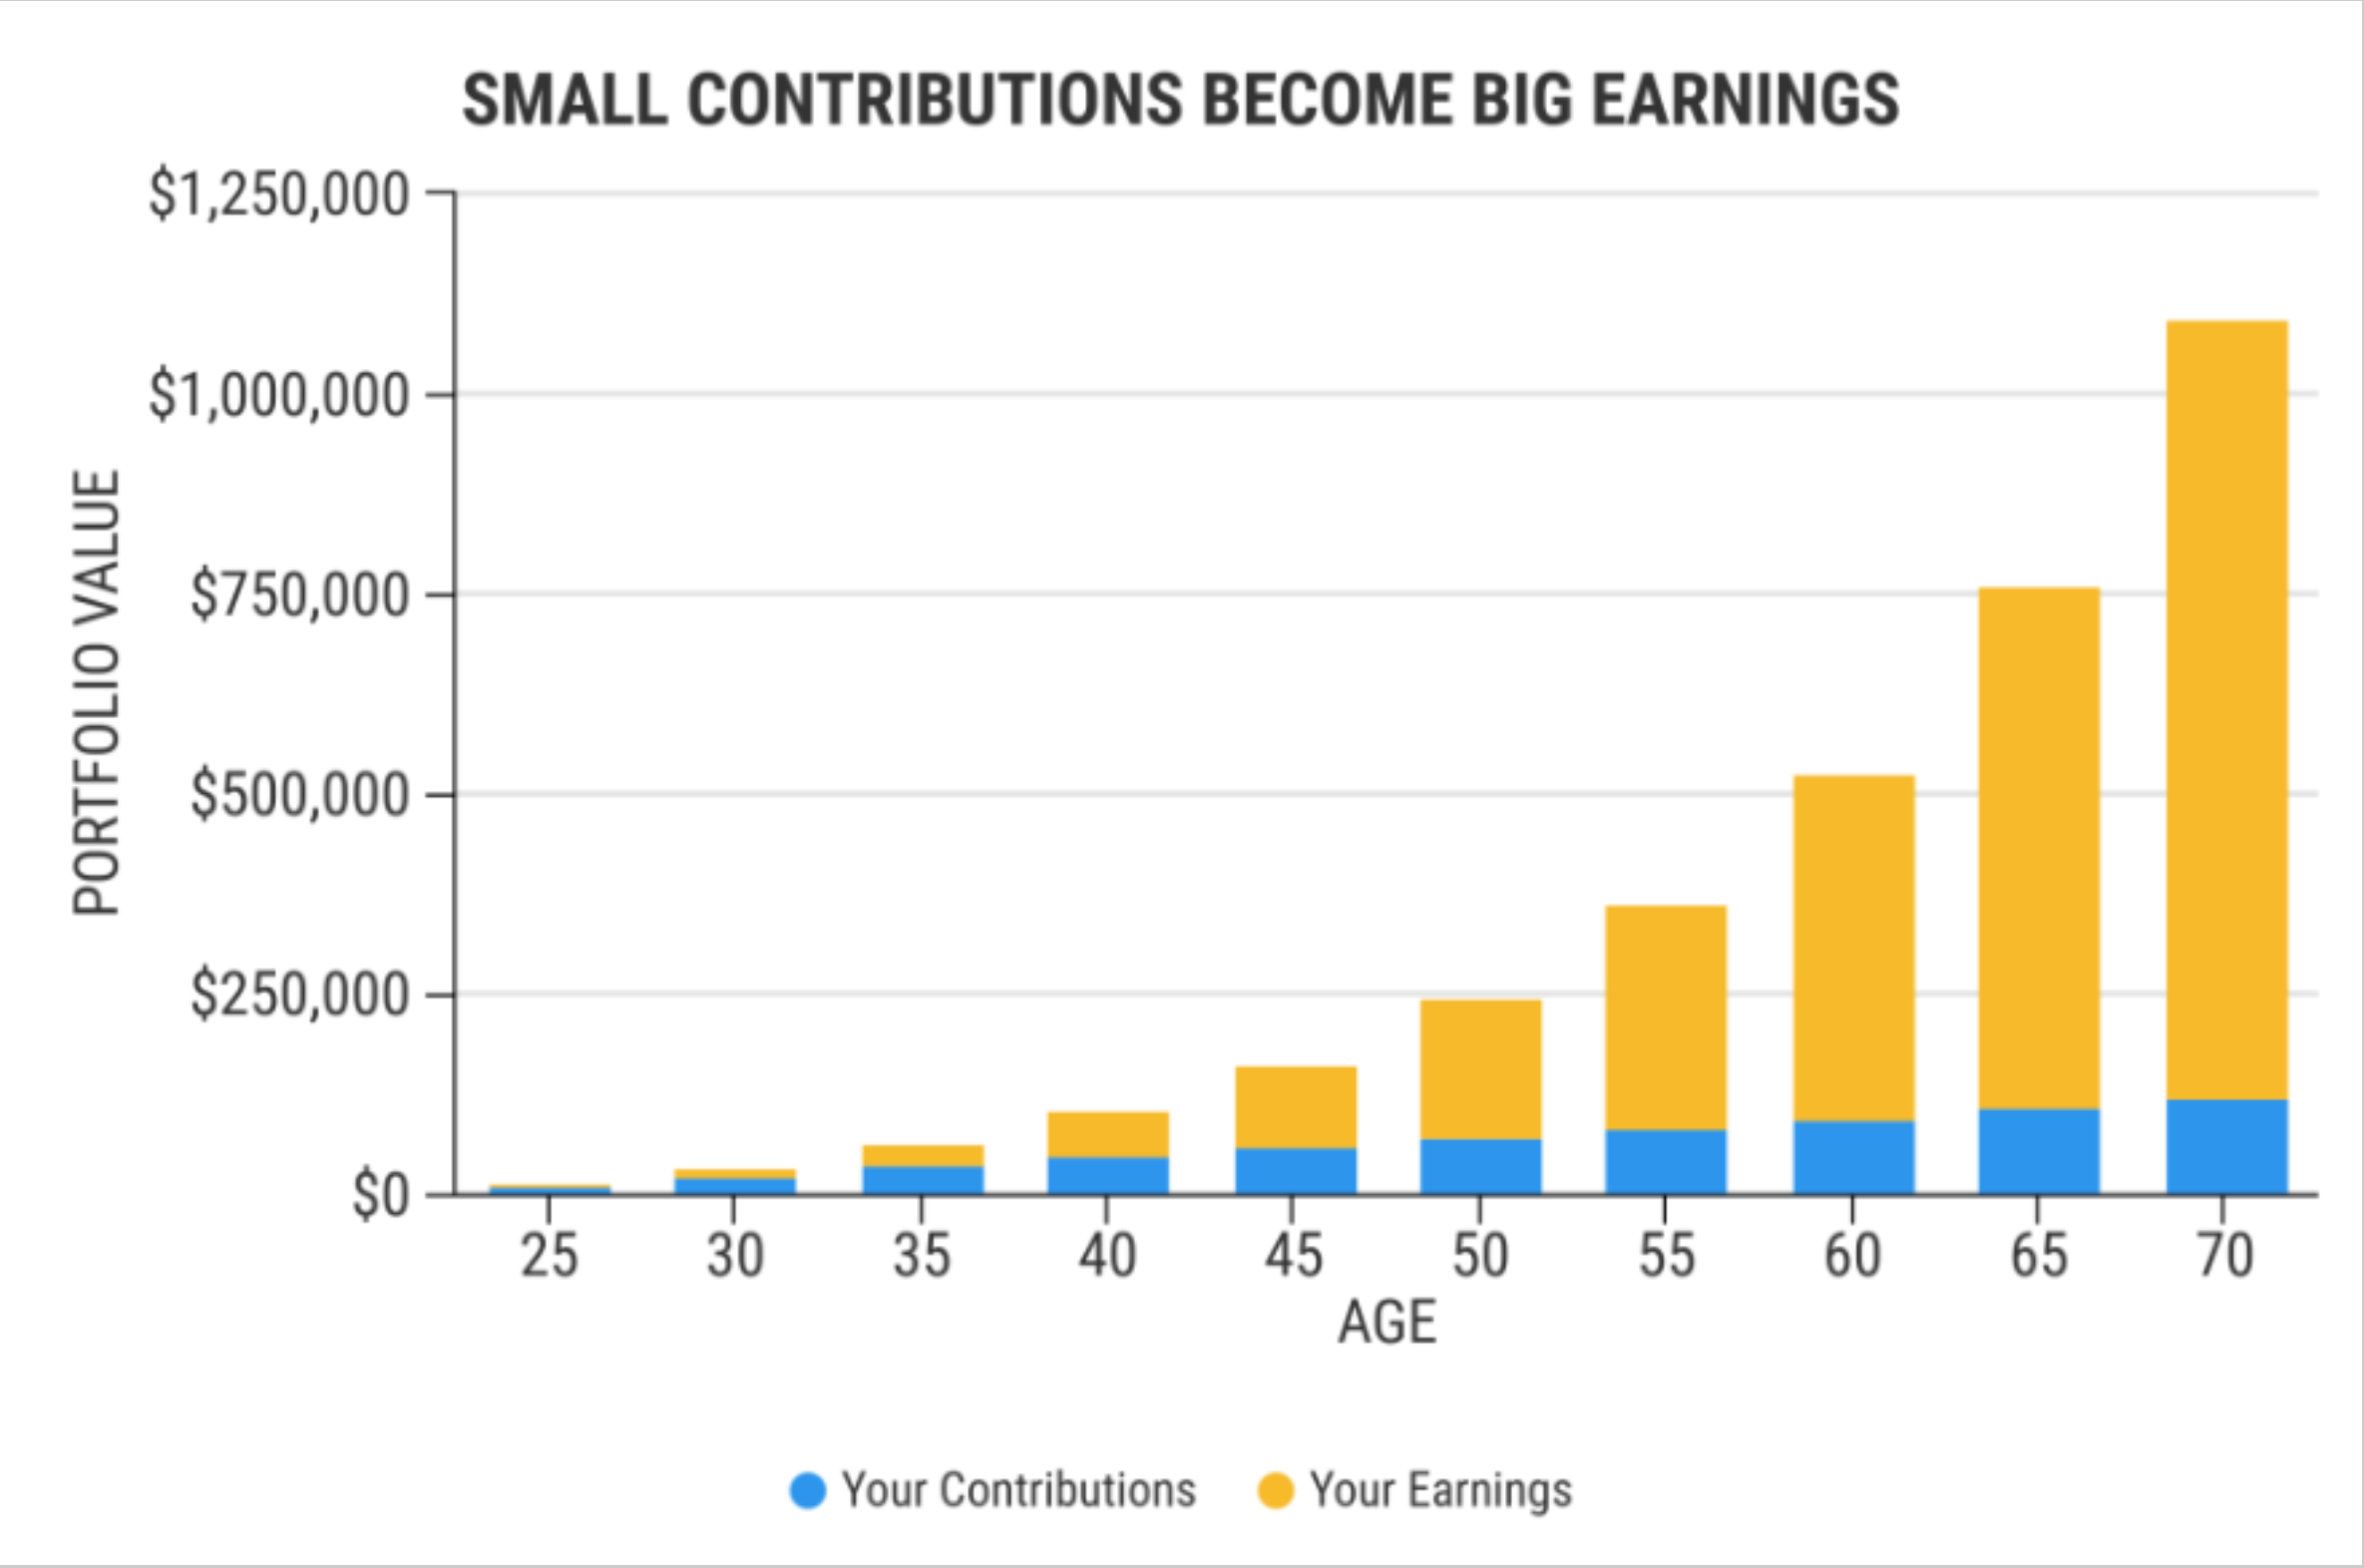 Small contributions become big earnings